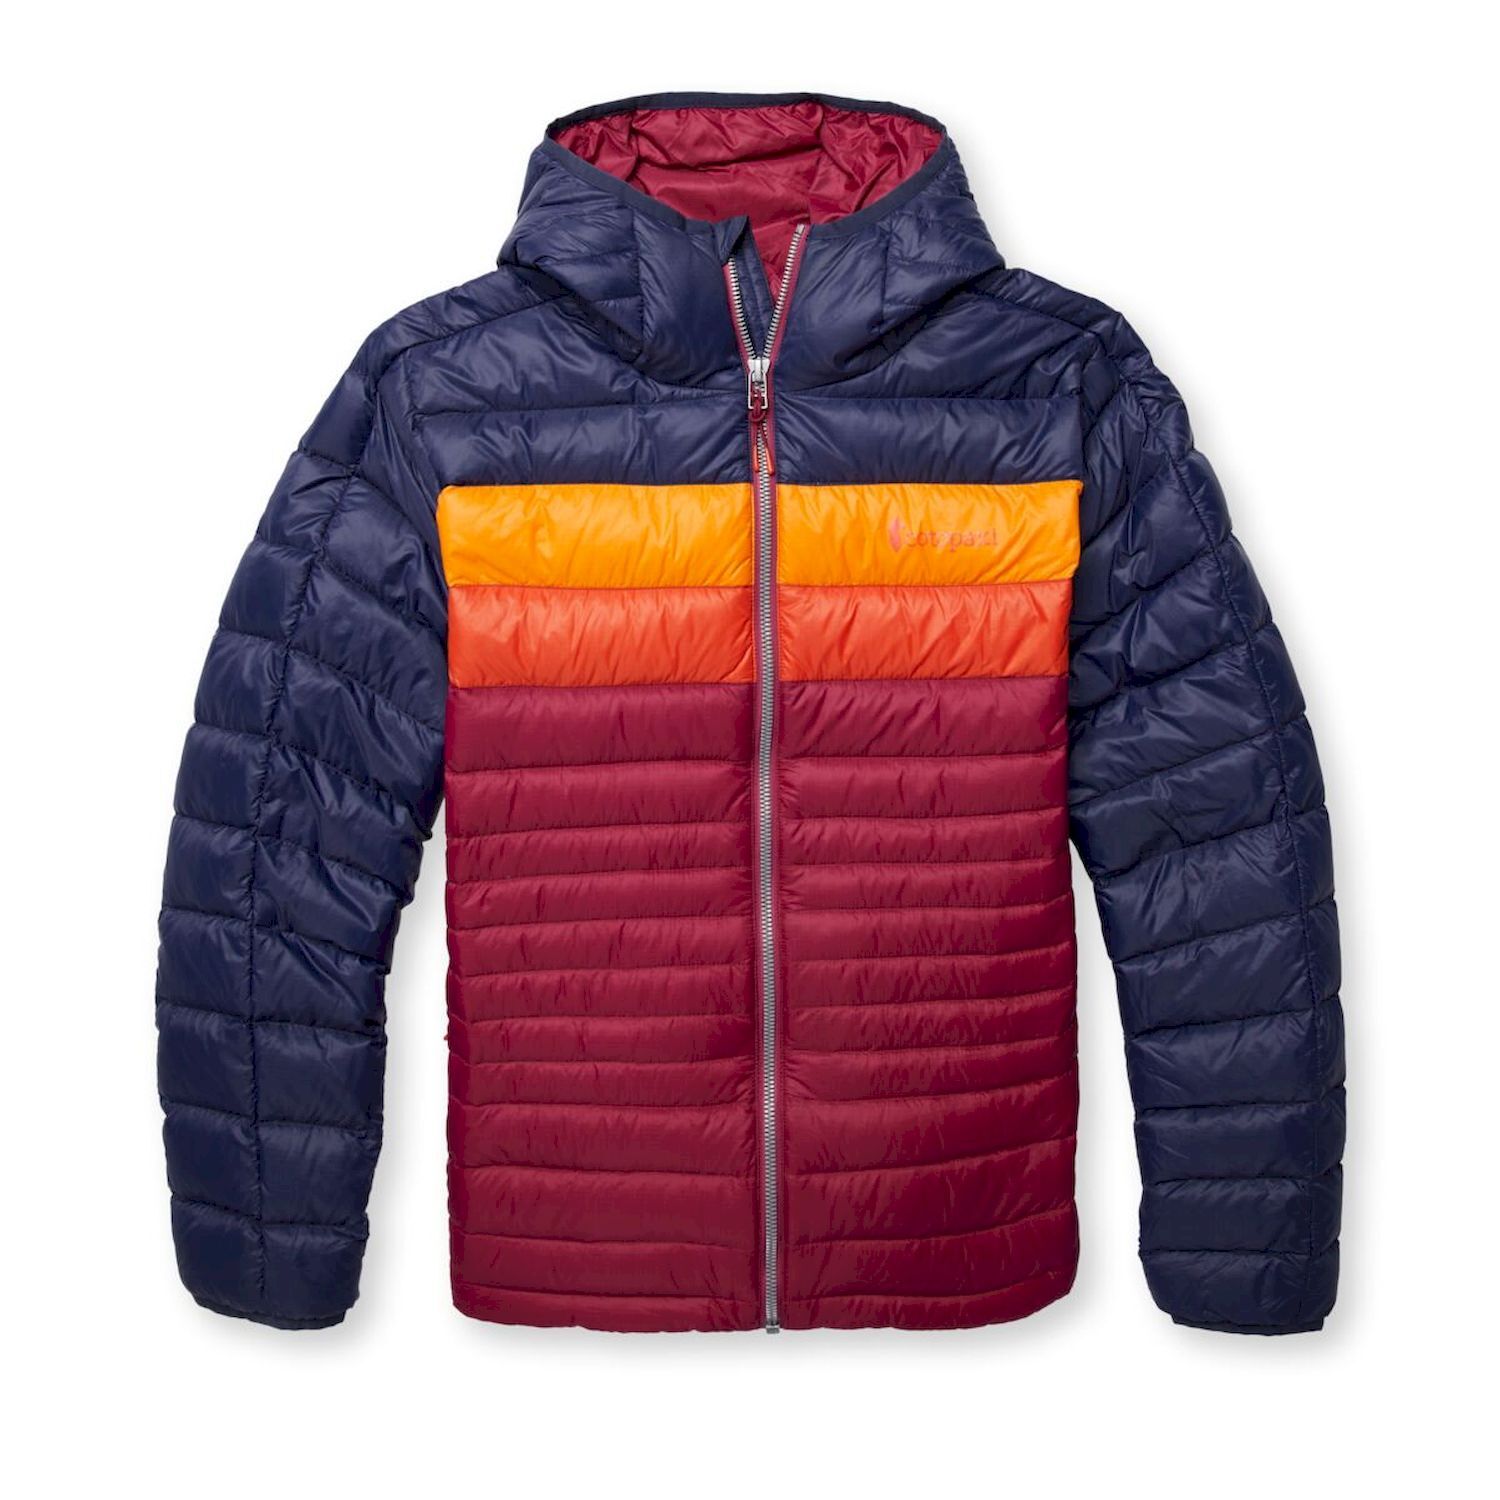 Cotopaxi Fuego Down Hooded Jacket - Down jacket - Women's